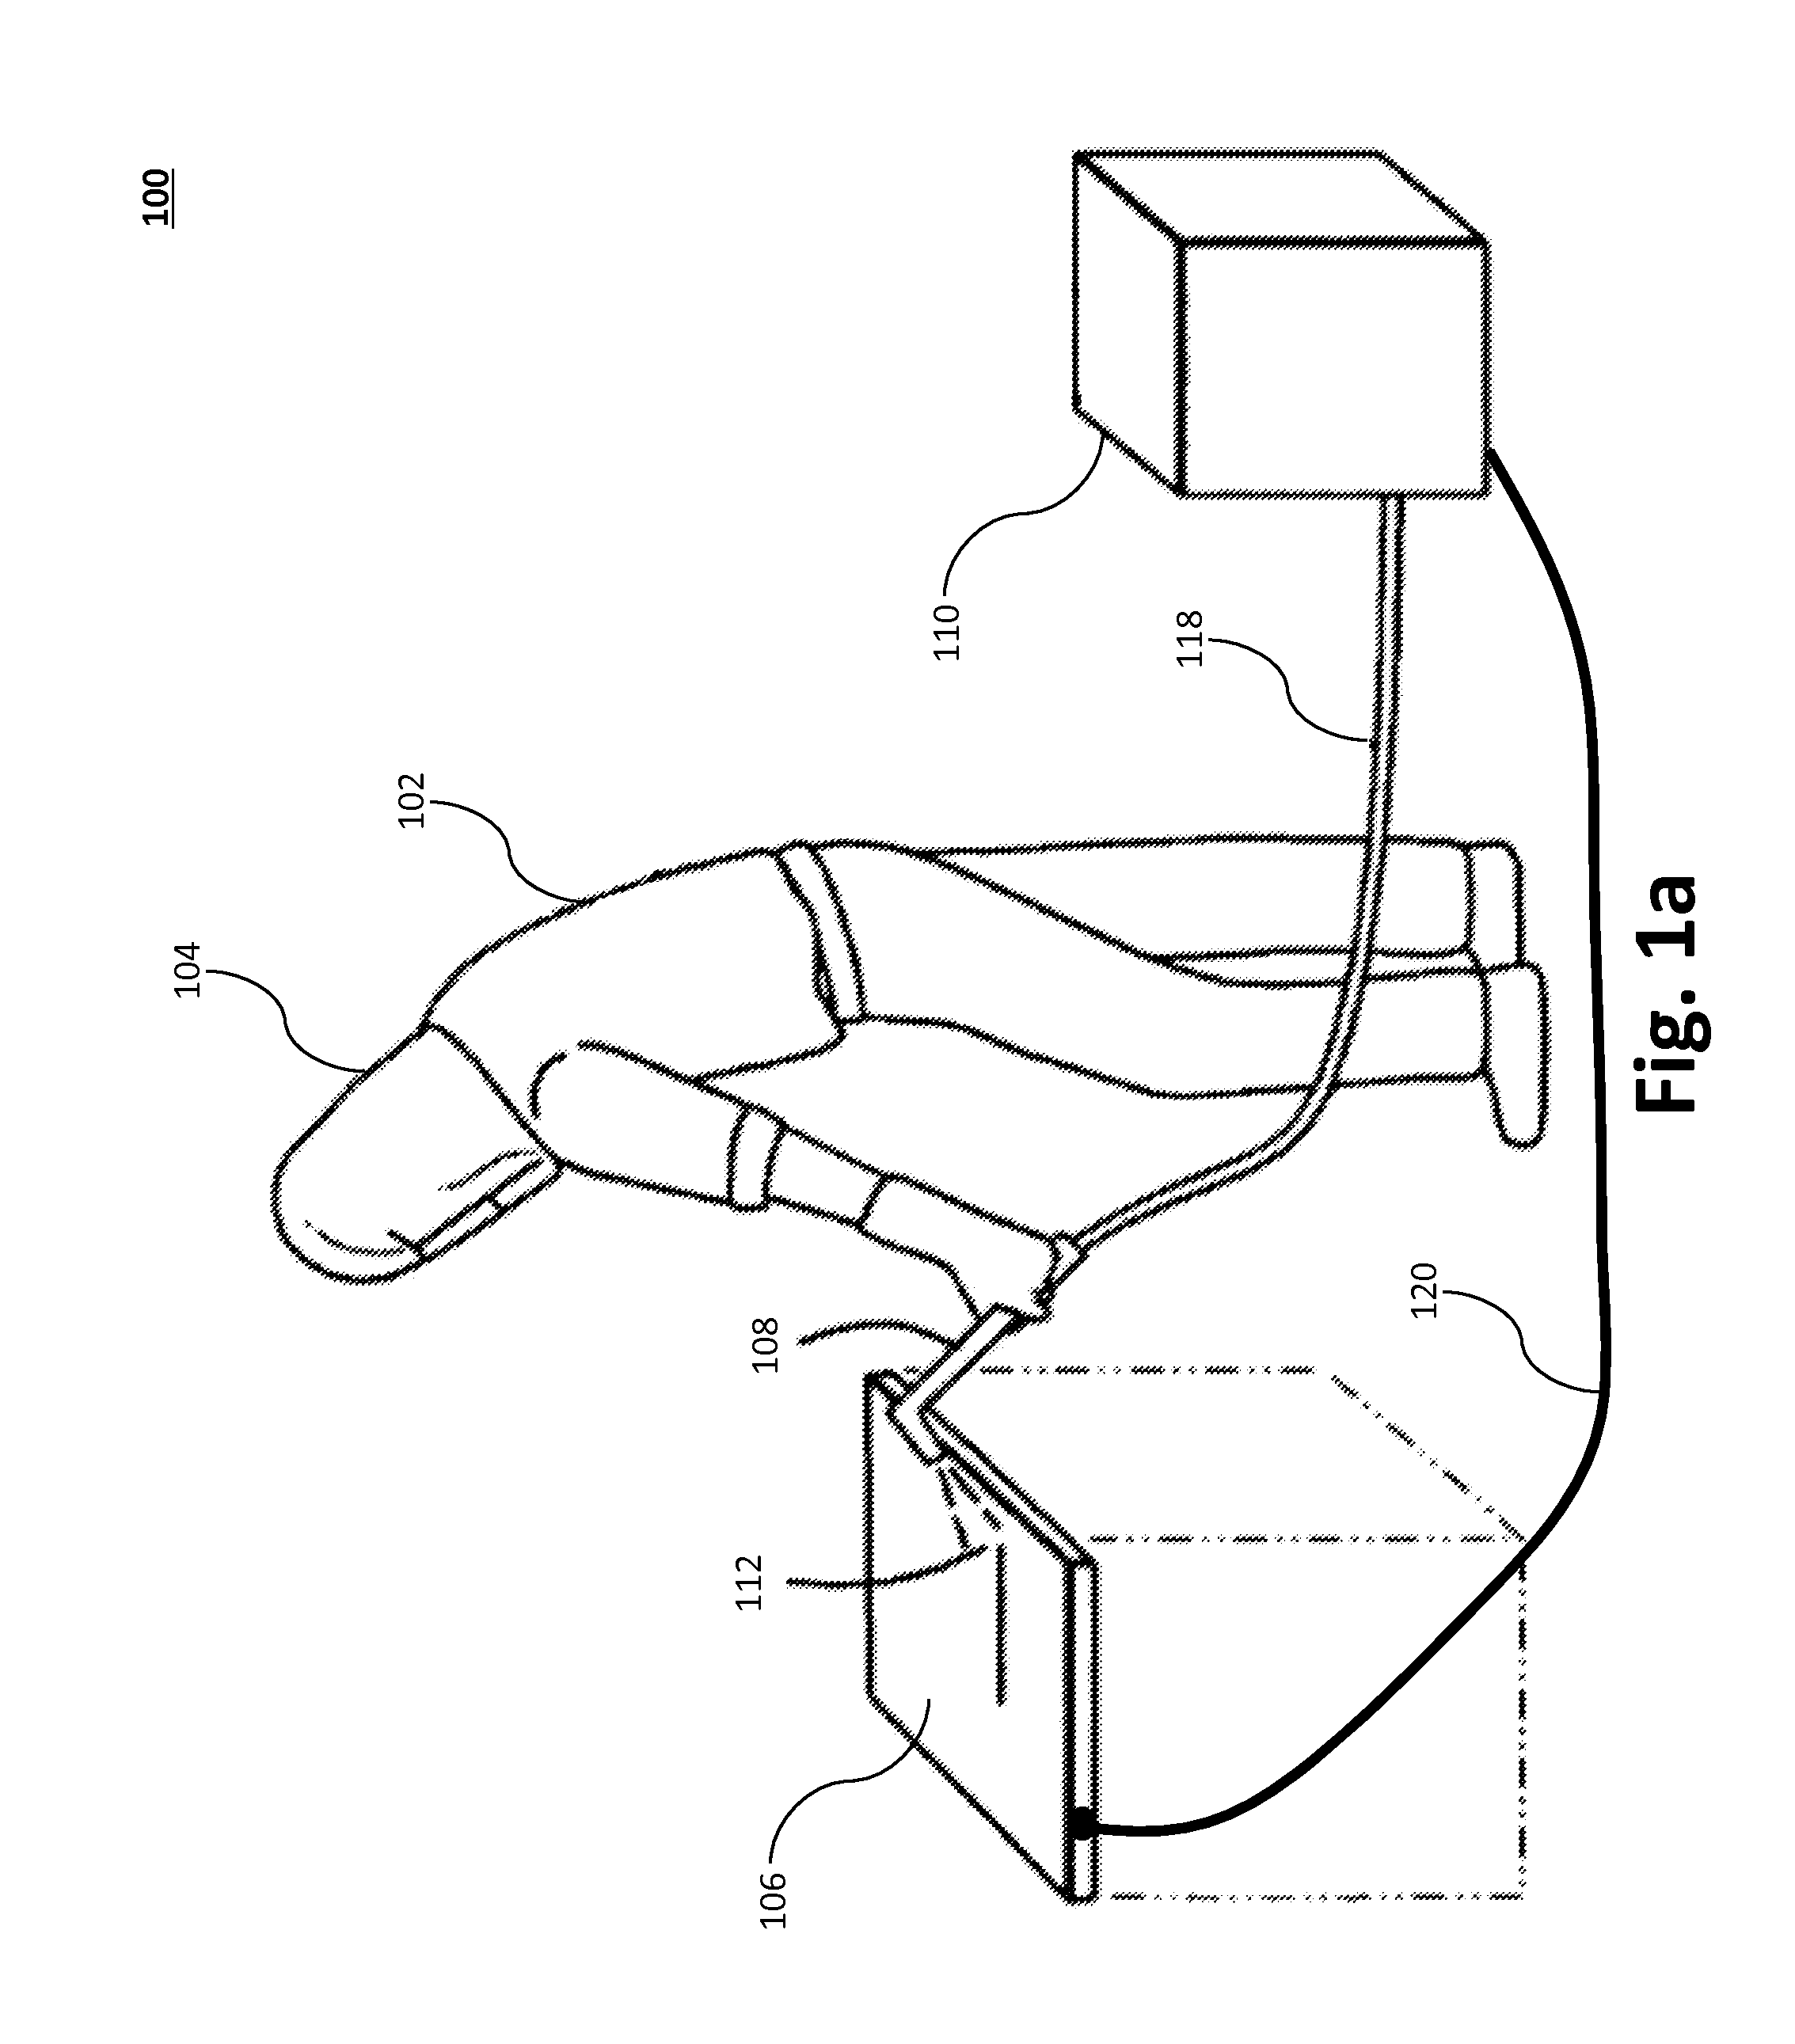 Systems and Methods for Controlling Fuel Vapor Flow in an Engine-Driven Generator